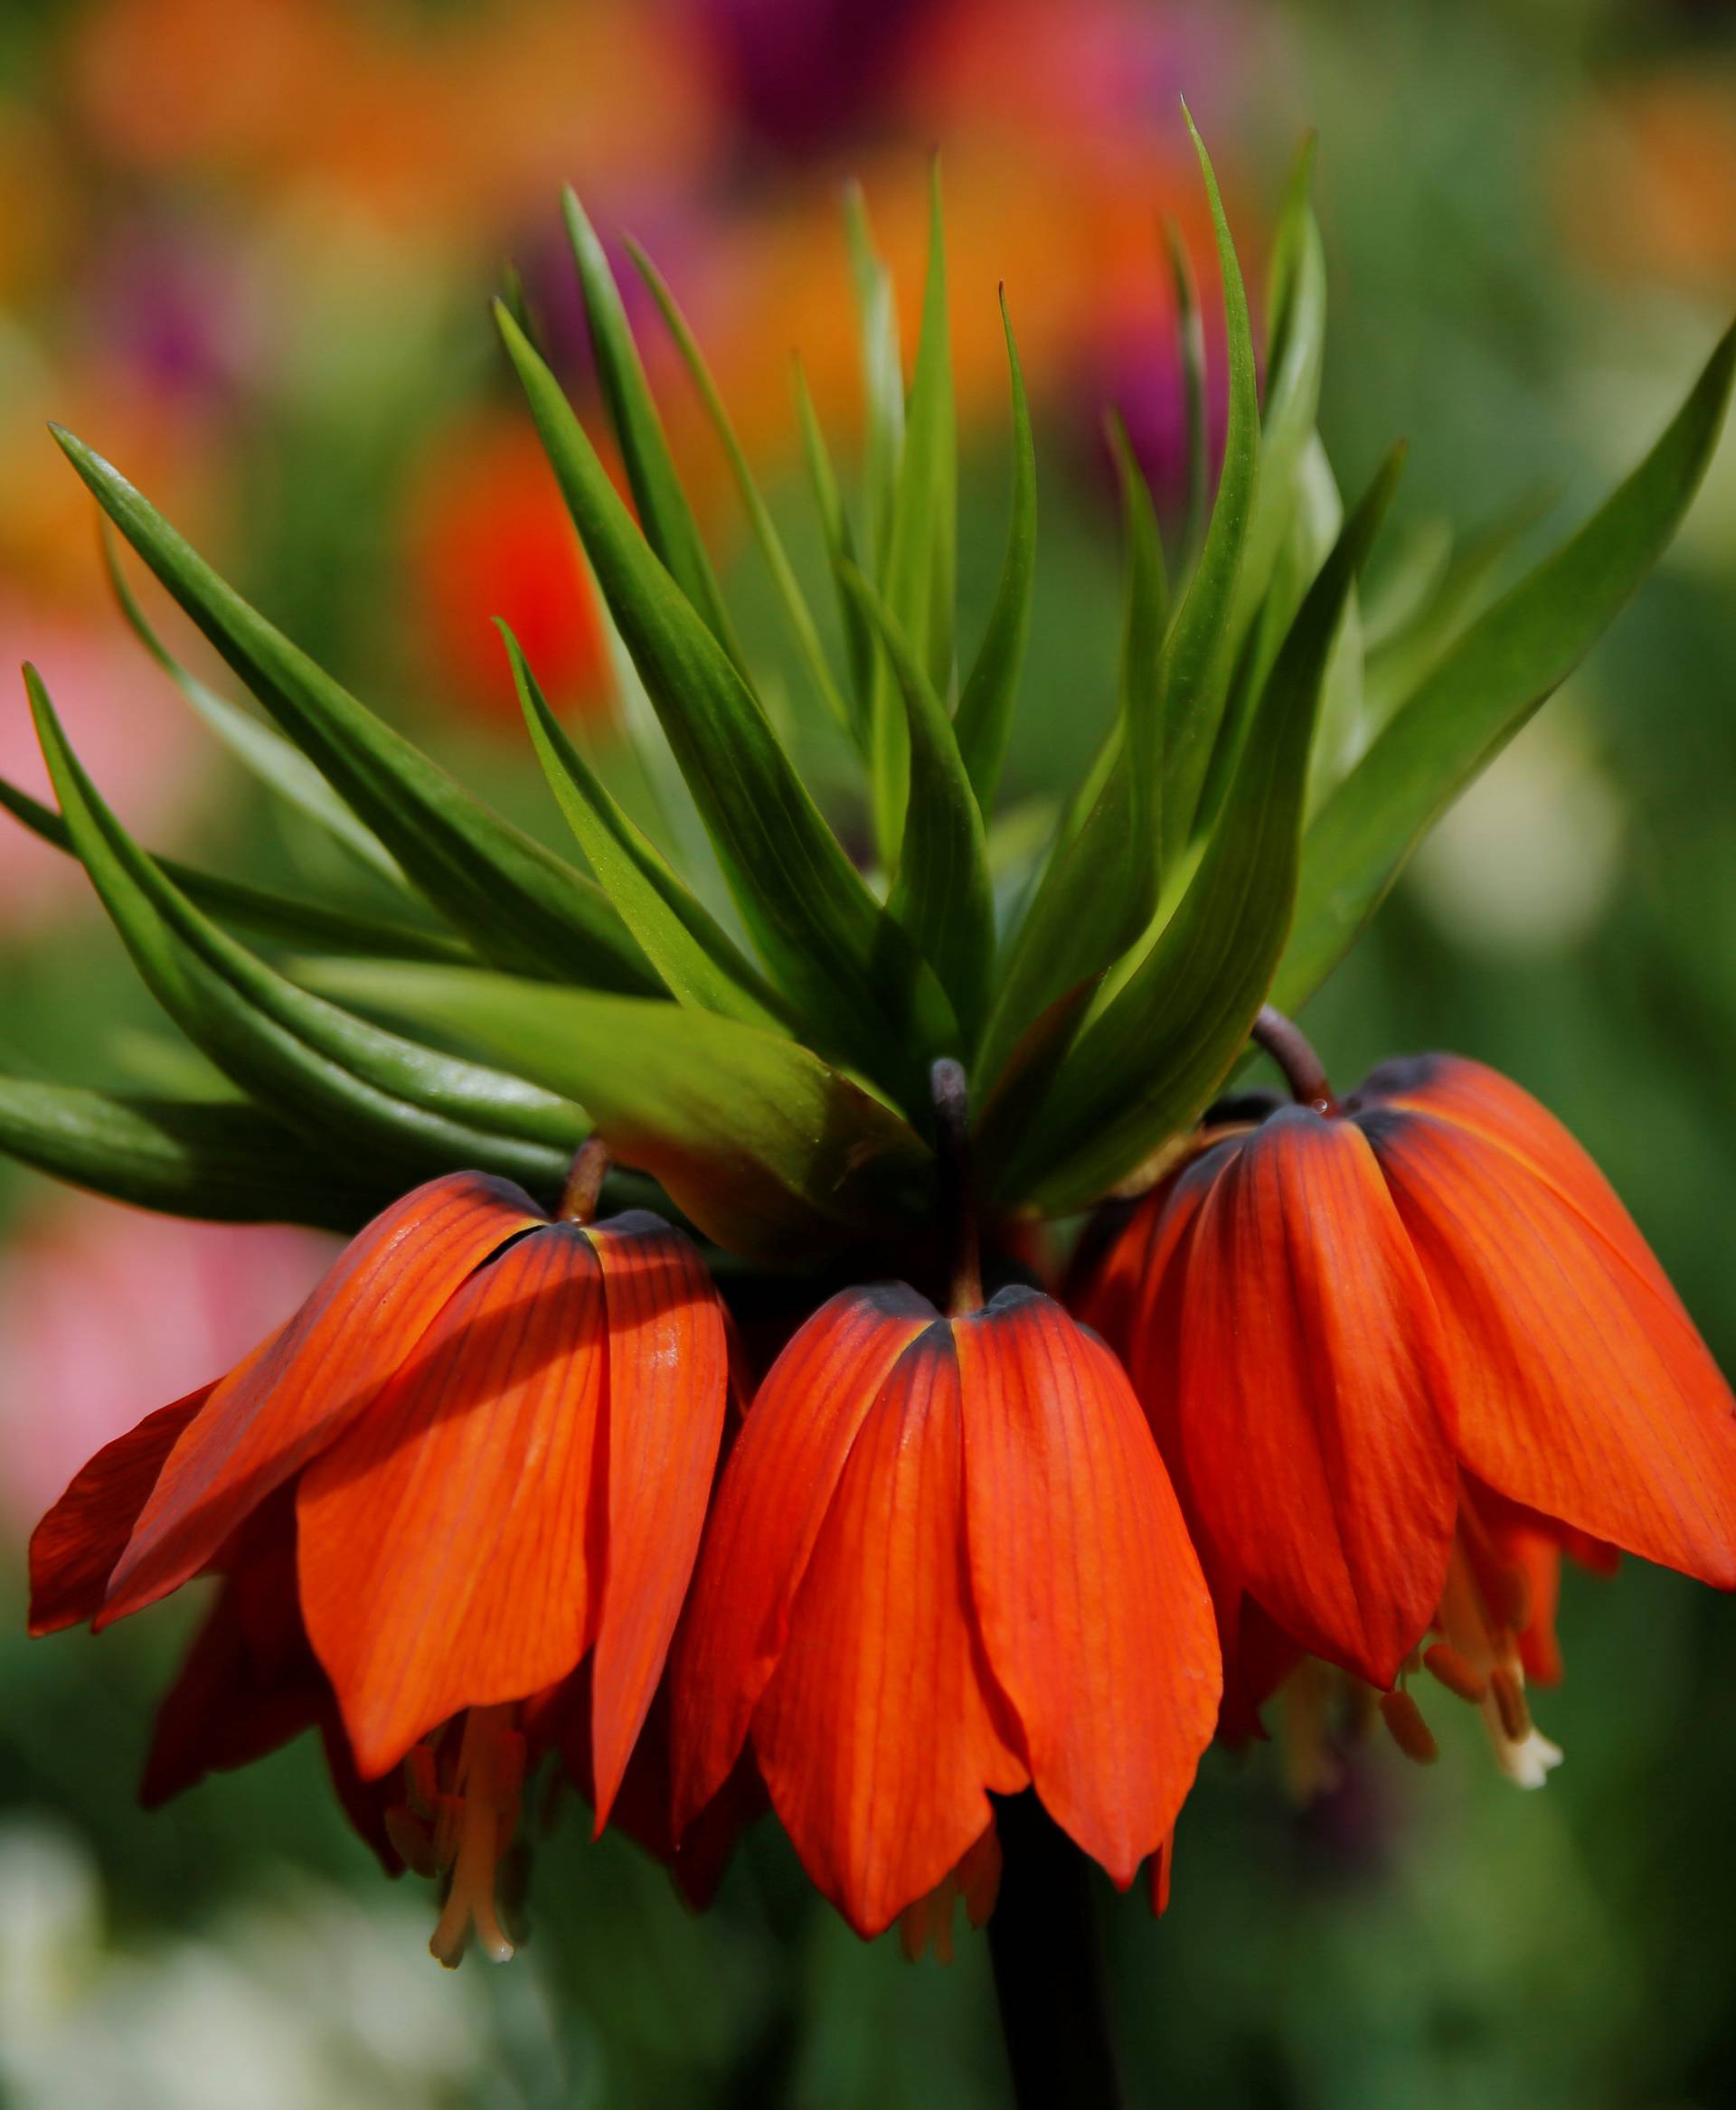 A Fritillaria Imperialis (Crown imperial) flower grows in Central Park during a spring day in New York